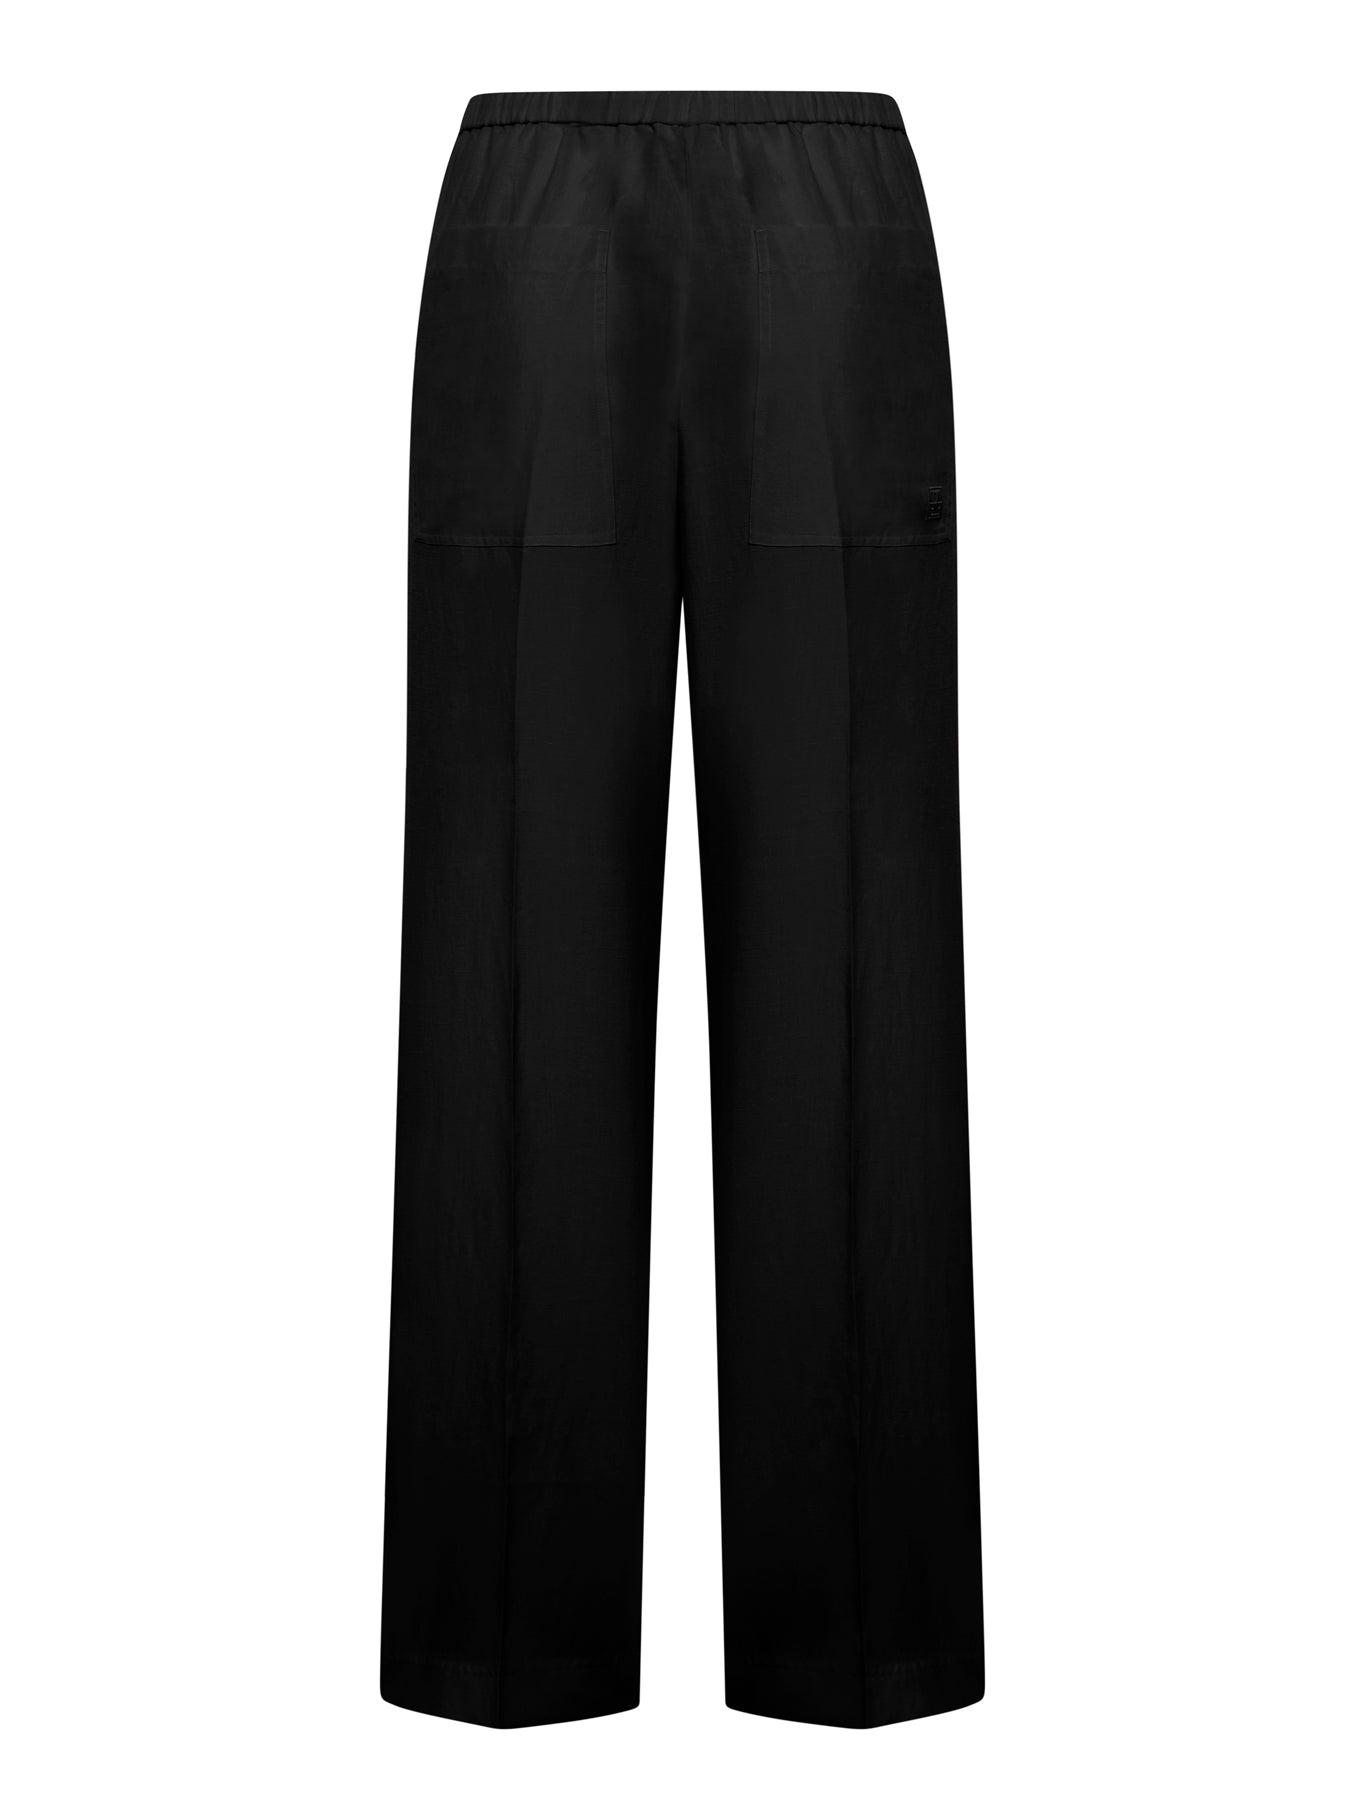 High waisted wide leg trousers